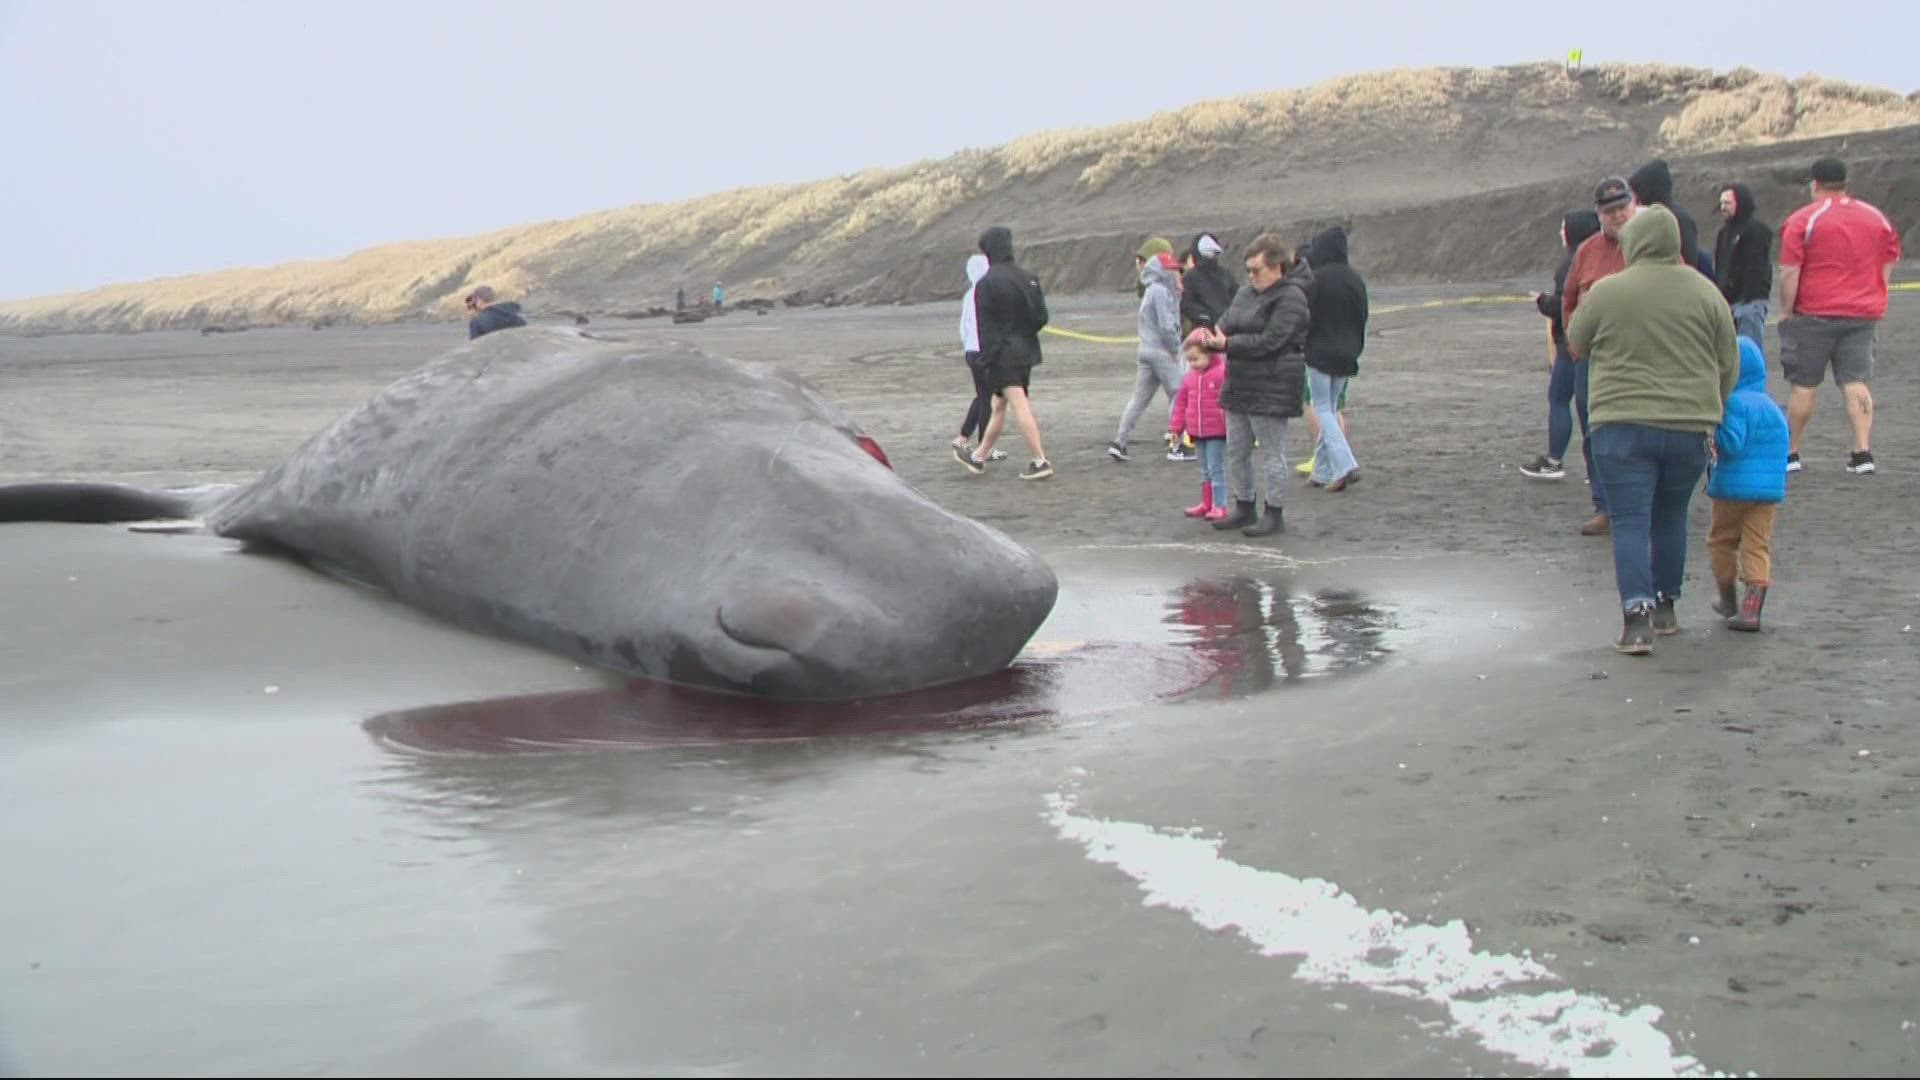 A dead sperm whale washed up onto the beach right next to the Peter Iredale Shipwreck along the northern coast of Oregon.